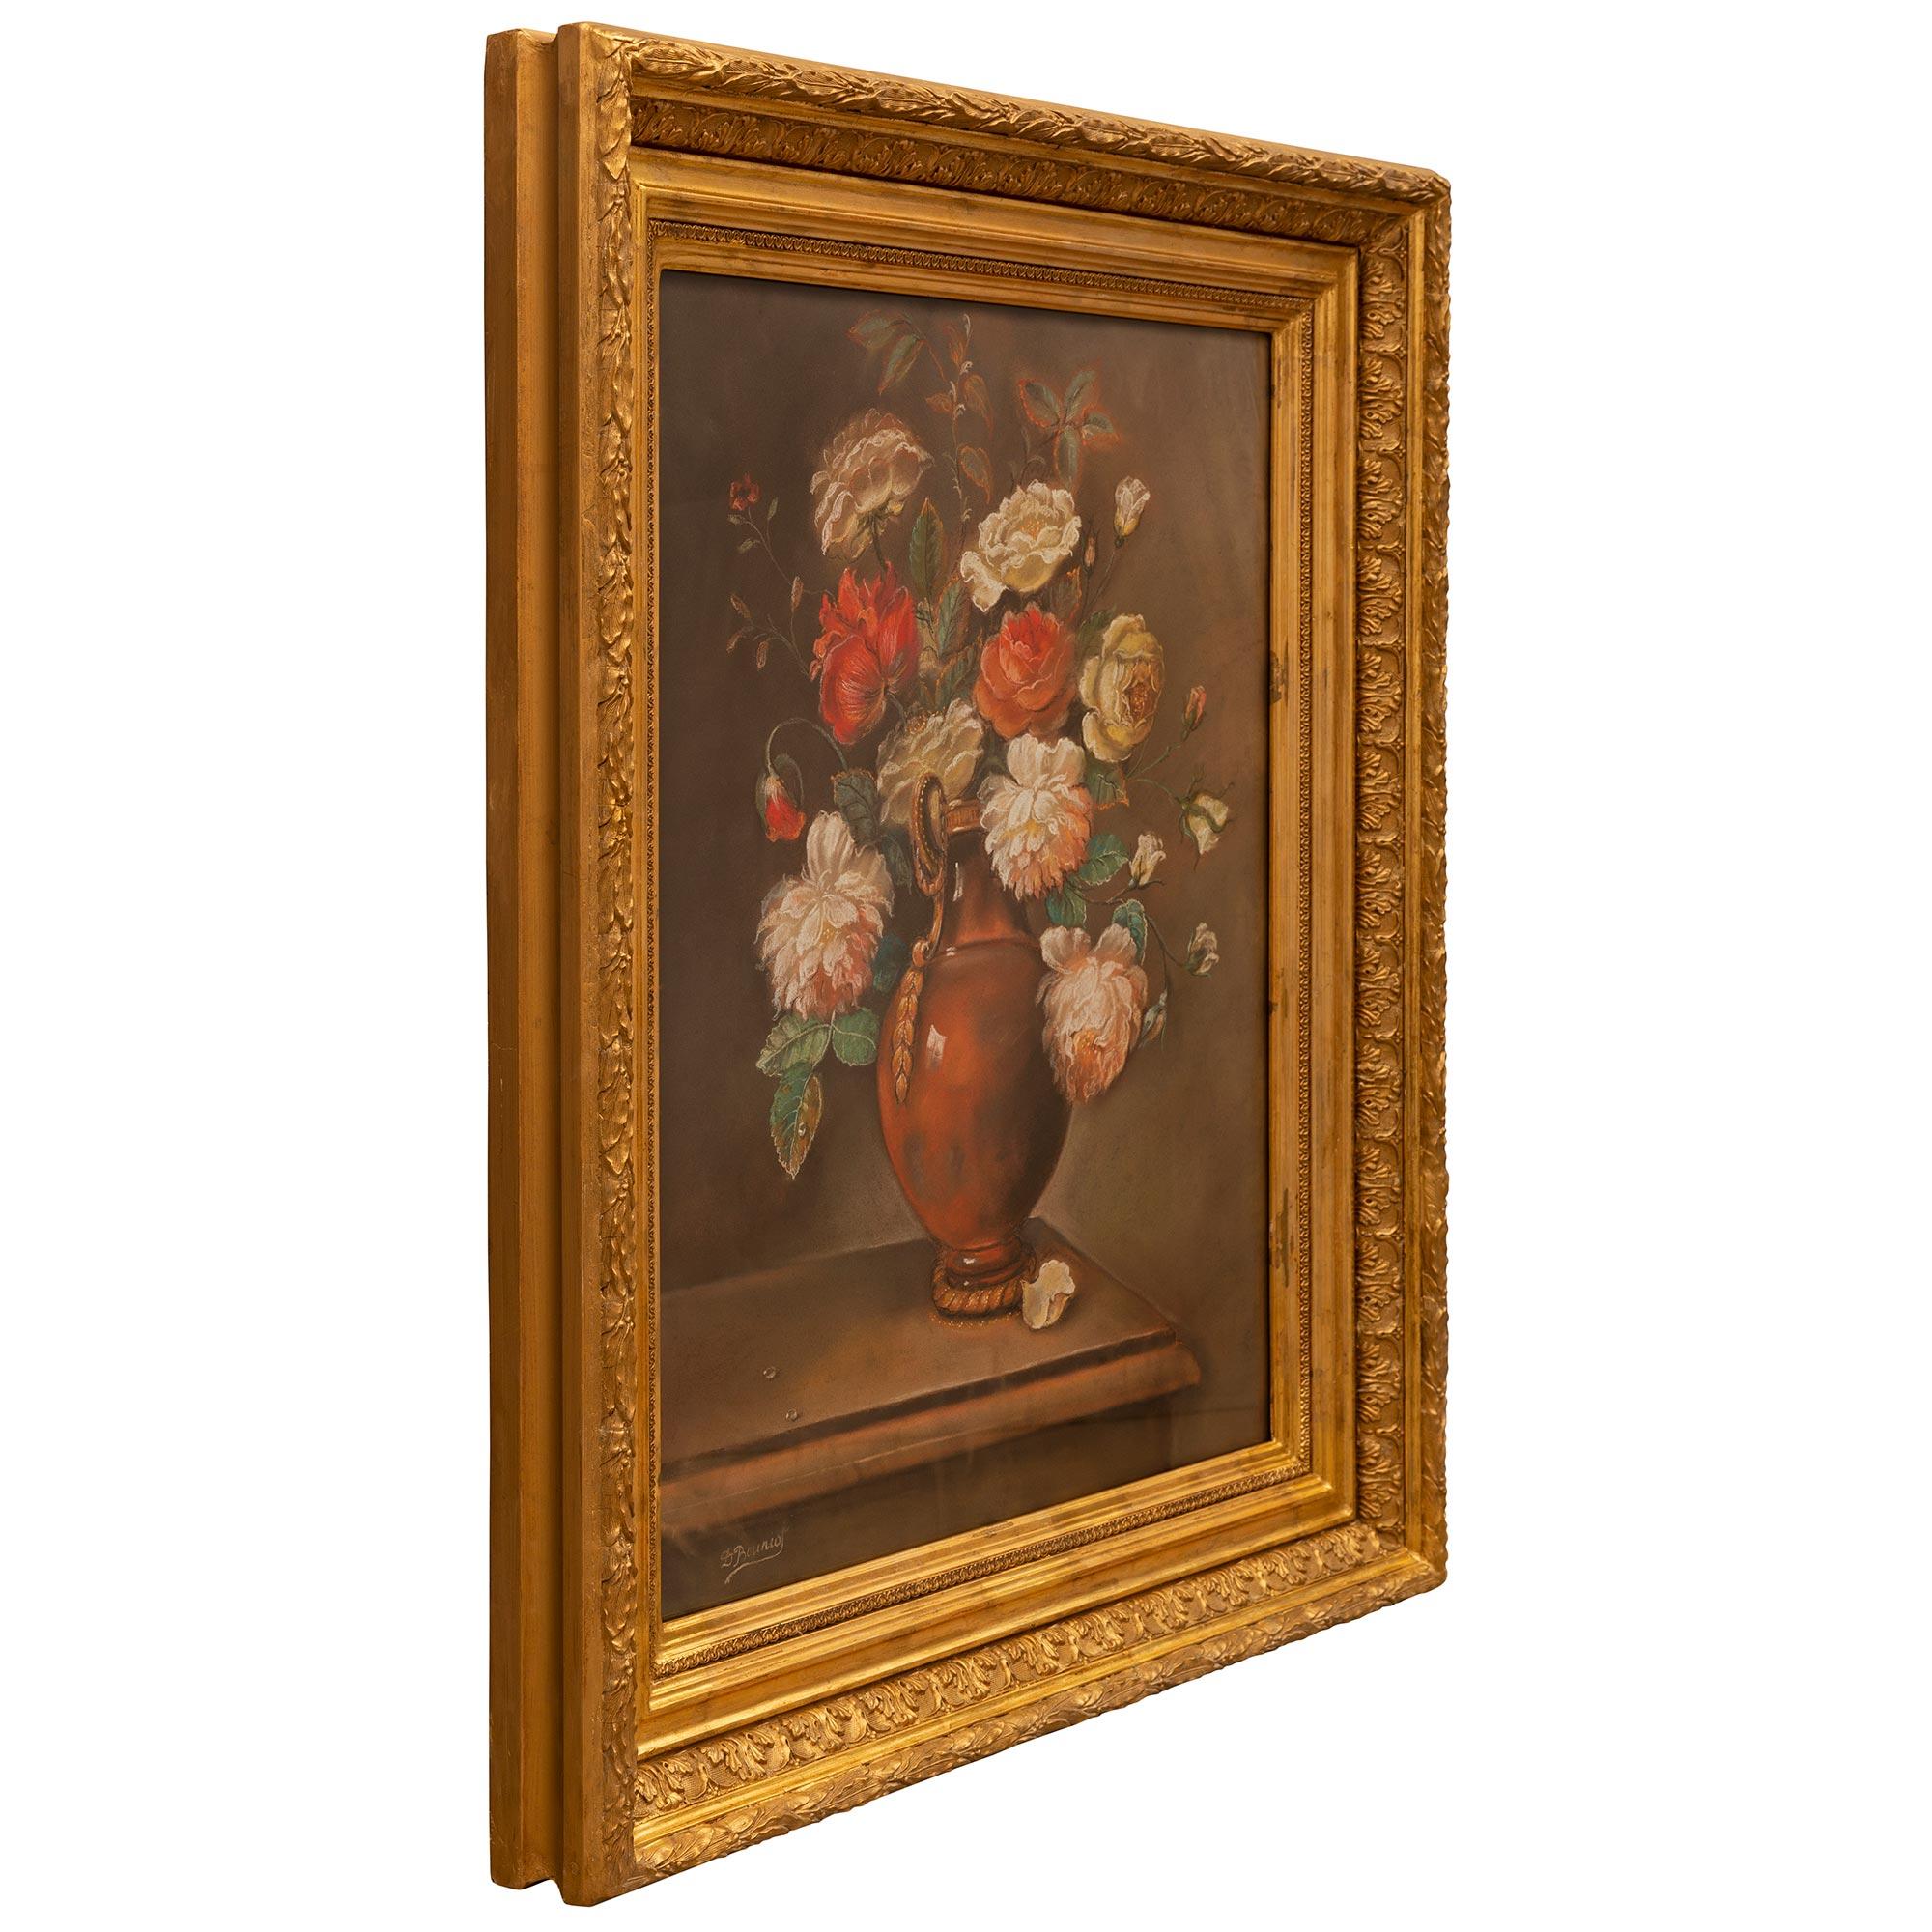 A beautiful Continental 19th century Louis XVI st. still life pastel set in its original giltwood frame. The pastel depicts a wonderfully executed flower arrangement with beautiful vivid colored flowers in a charming vase on a table with a fallen